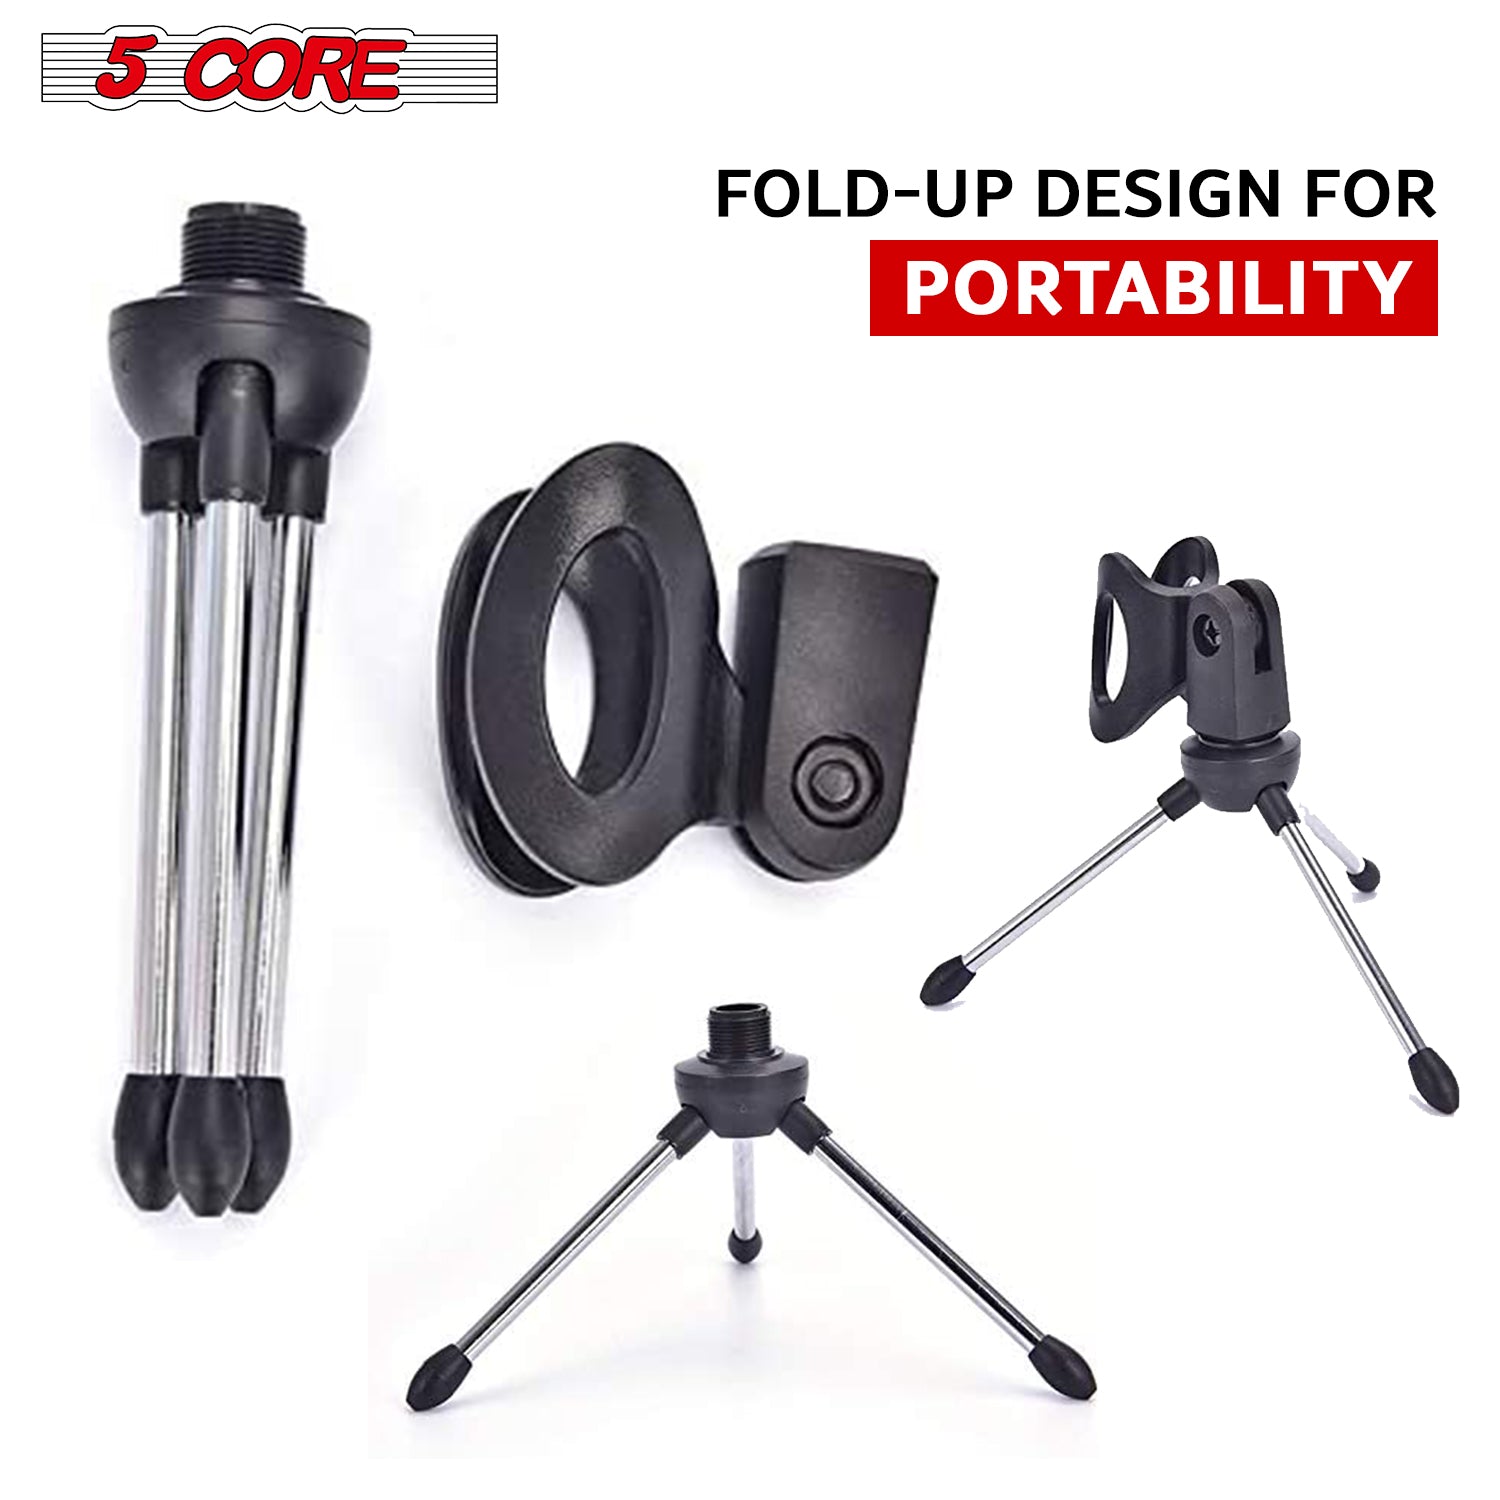 5 Core Mini Tripod Desktop Microphone Stand with Clip for Wired Mics Collapsible Legs Shockproof Easy To Store Adjustable Angle for Podcasts Online Chat Lectures Streaming -MINI TRIPOD MIC STAND